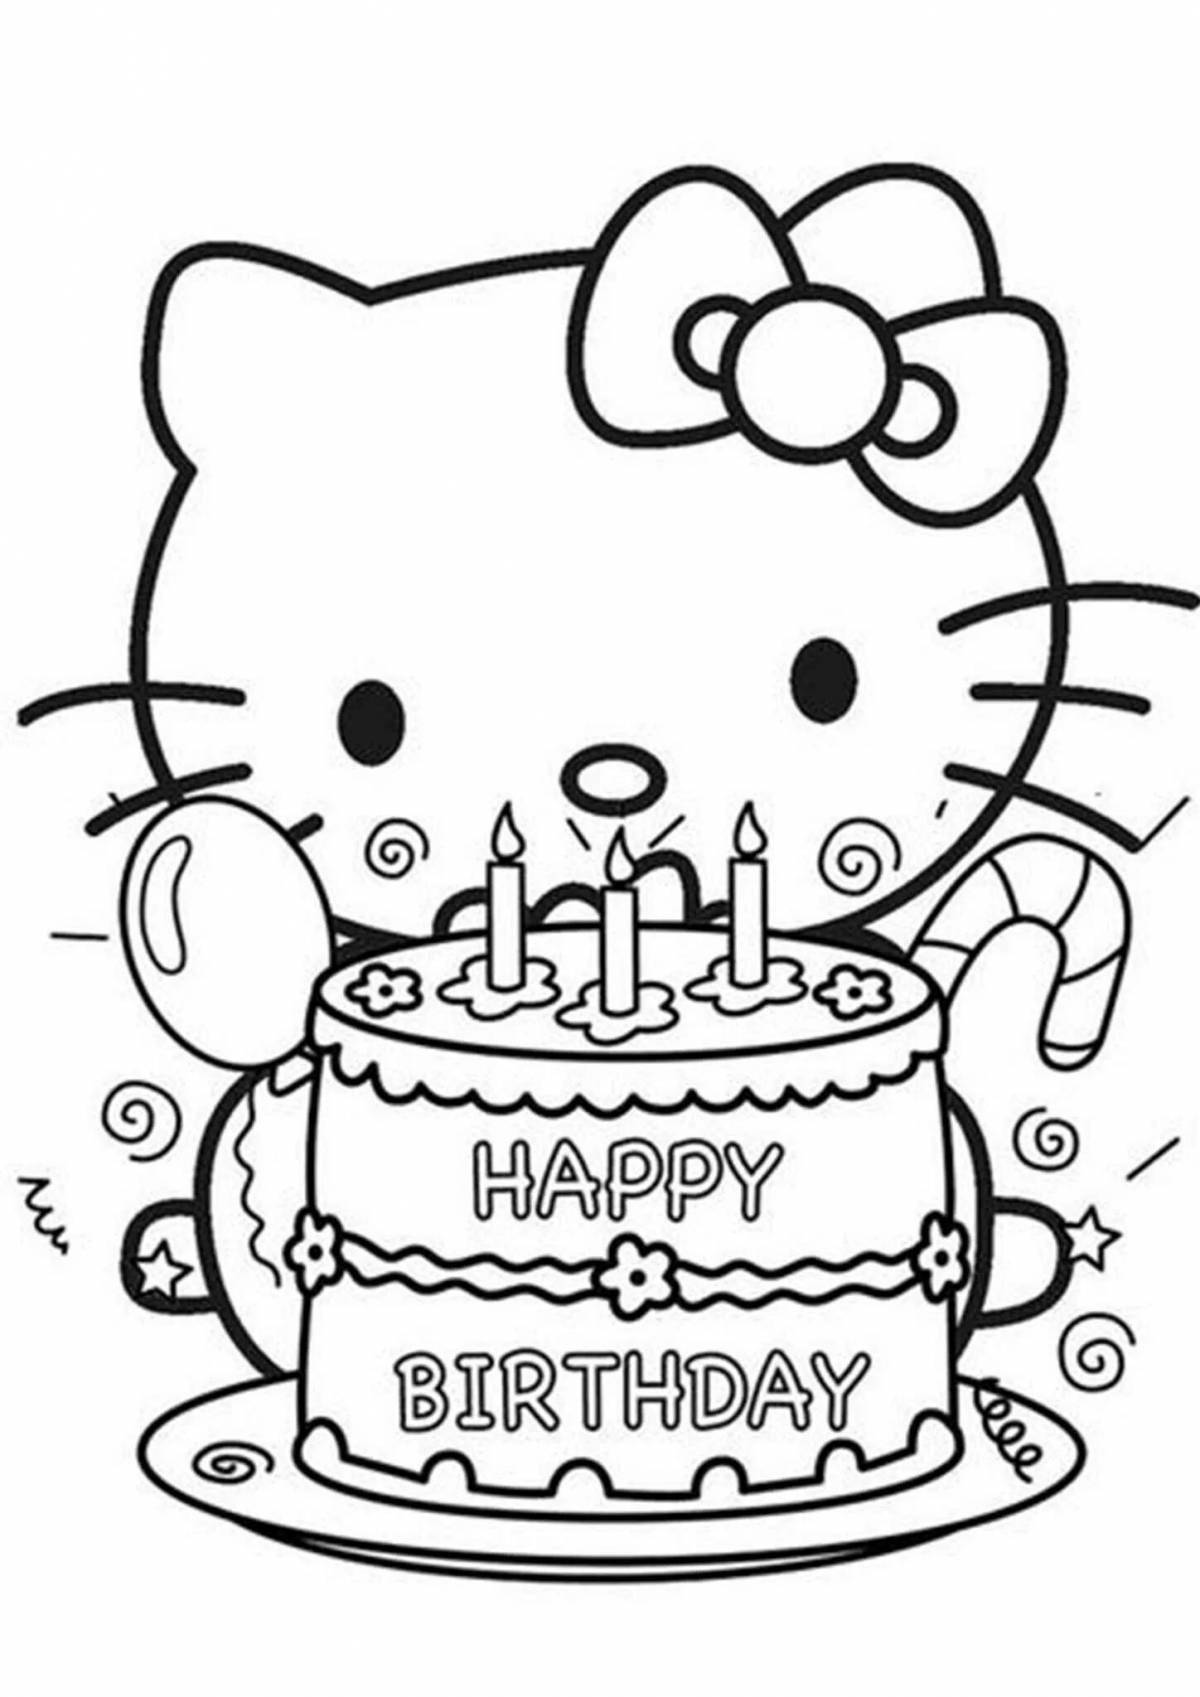 Coloring page cute little sister for birthday